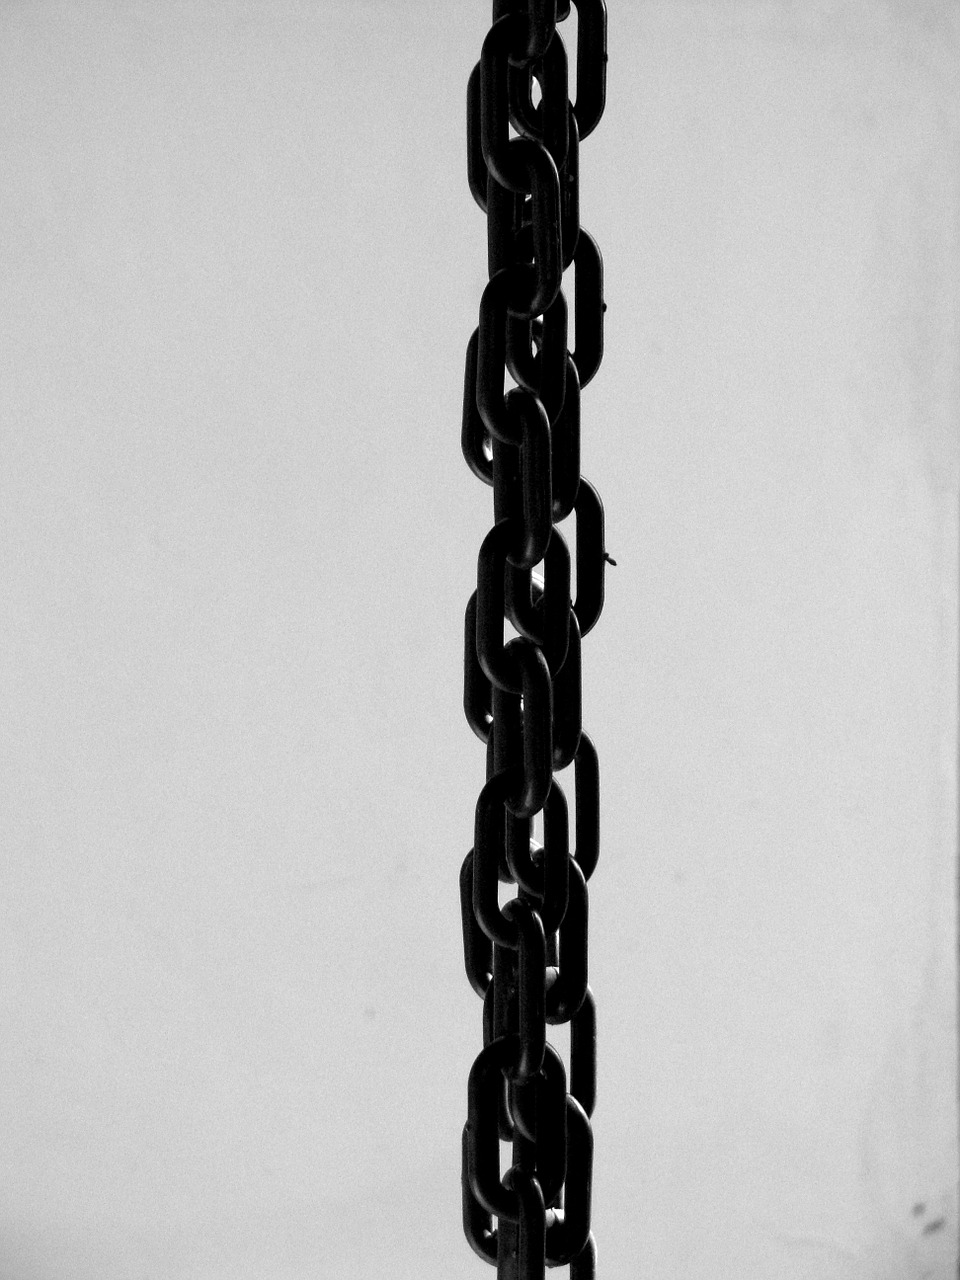 chain shapes contrast free photo